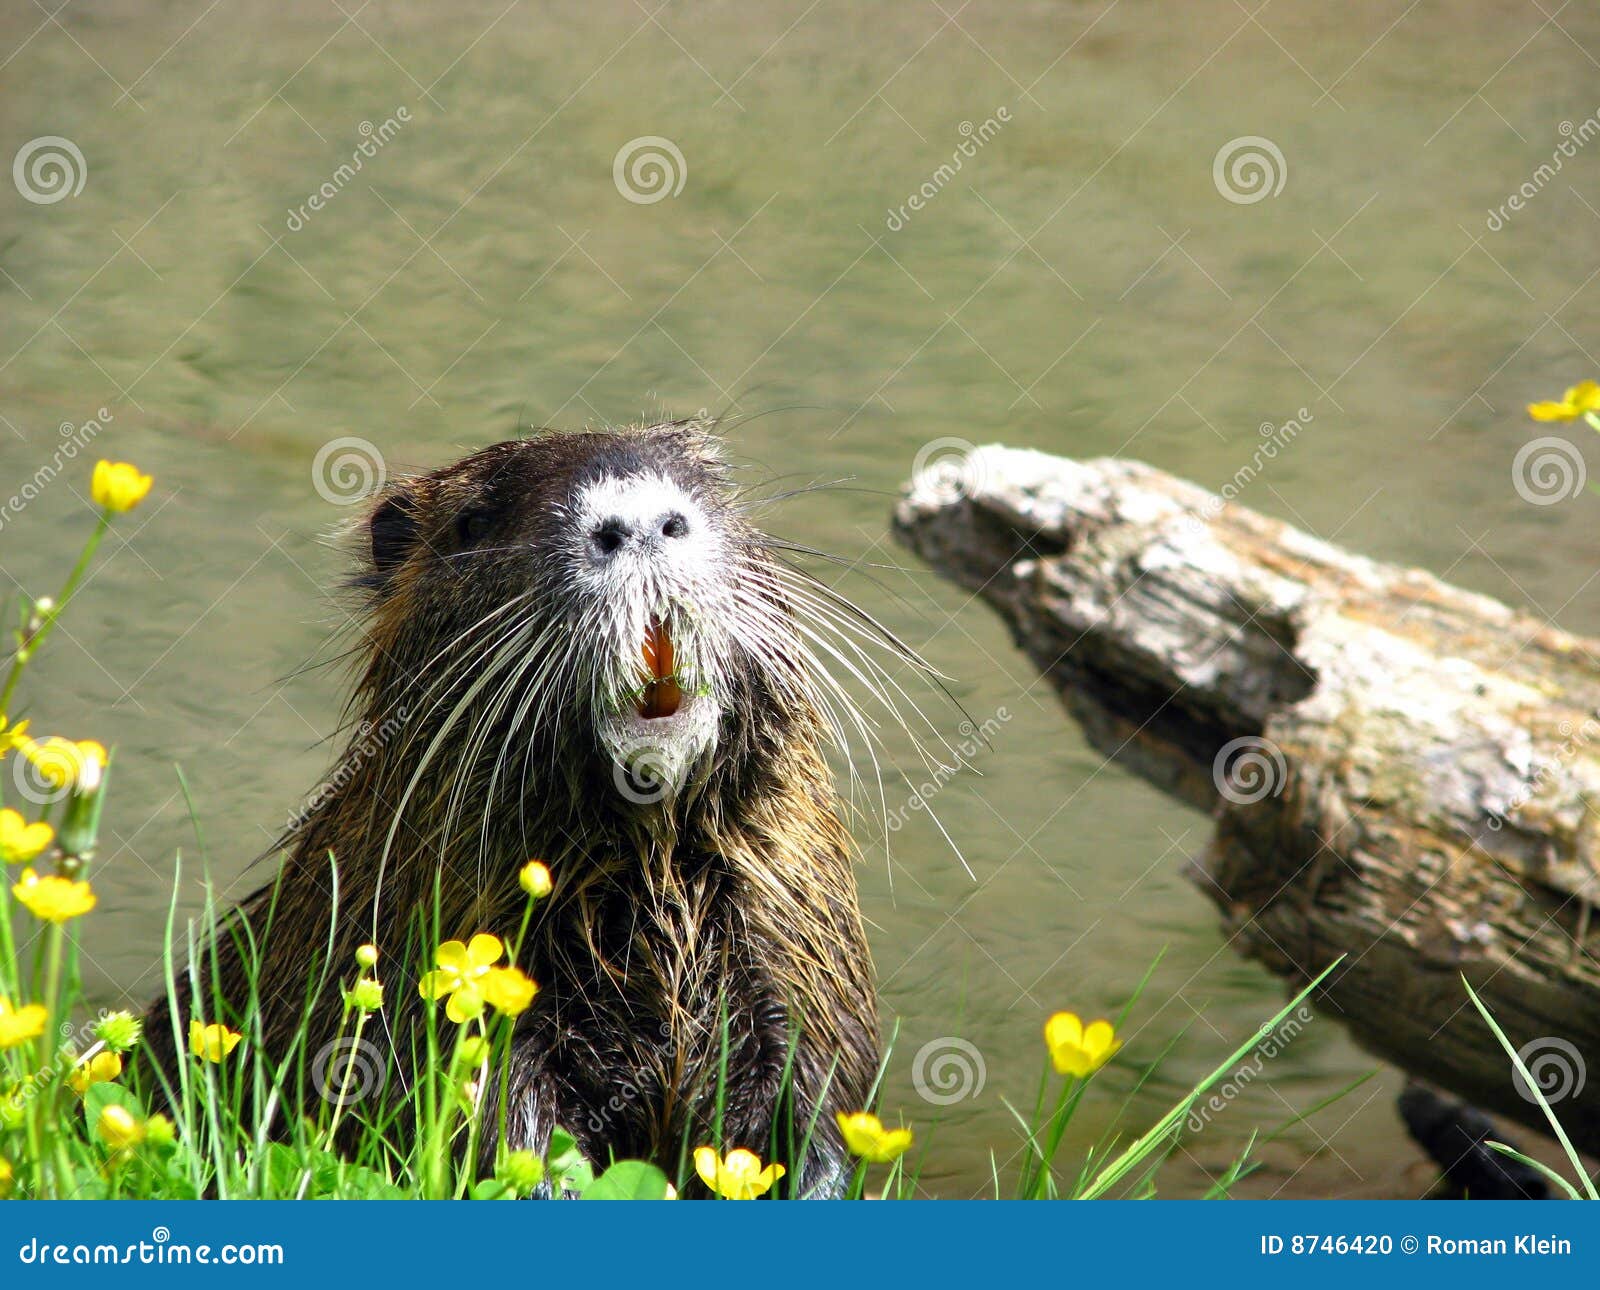 Curious nutria. Picture was taken during feeding of almost wild nutrias